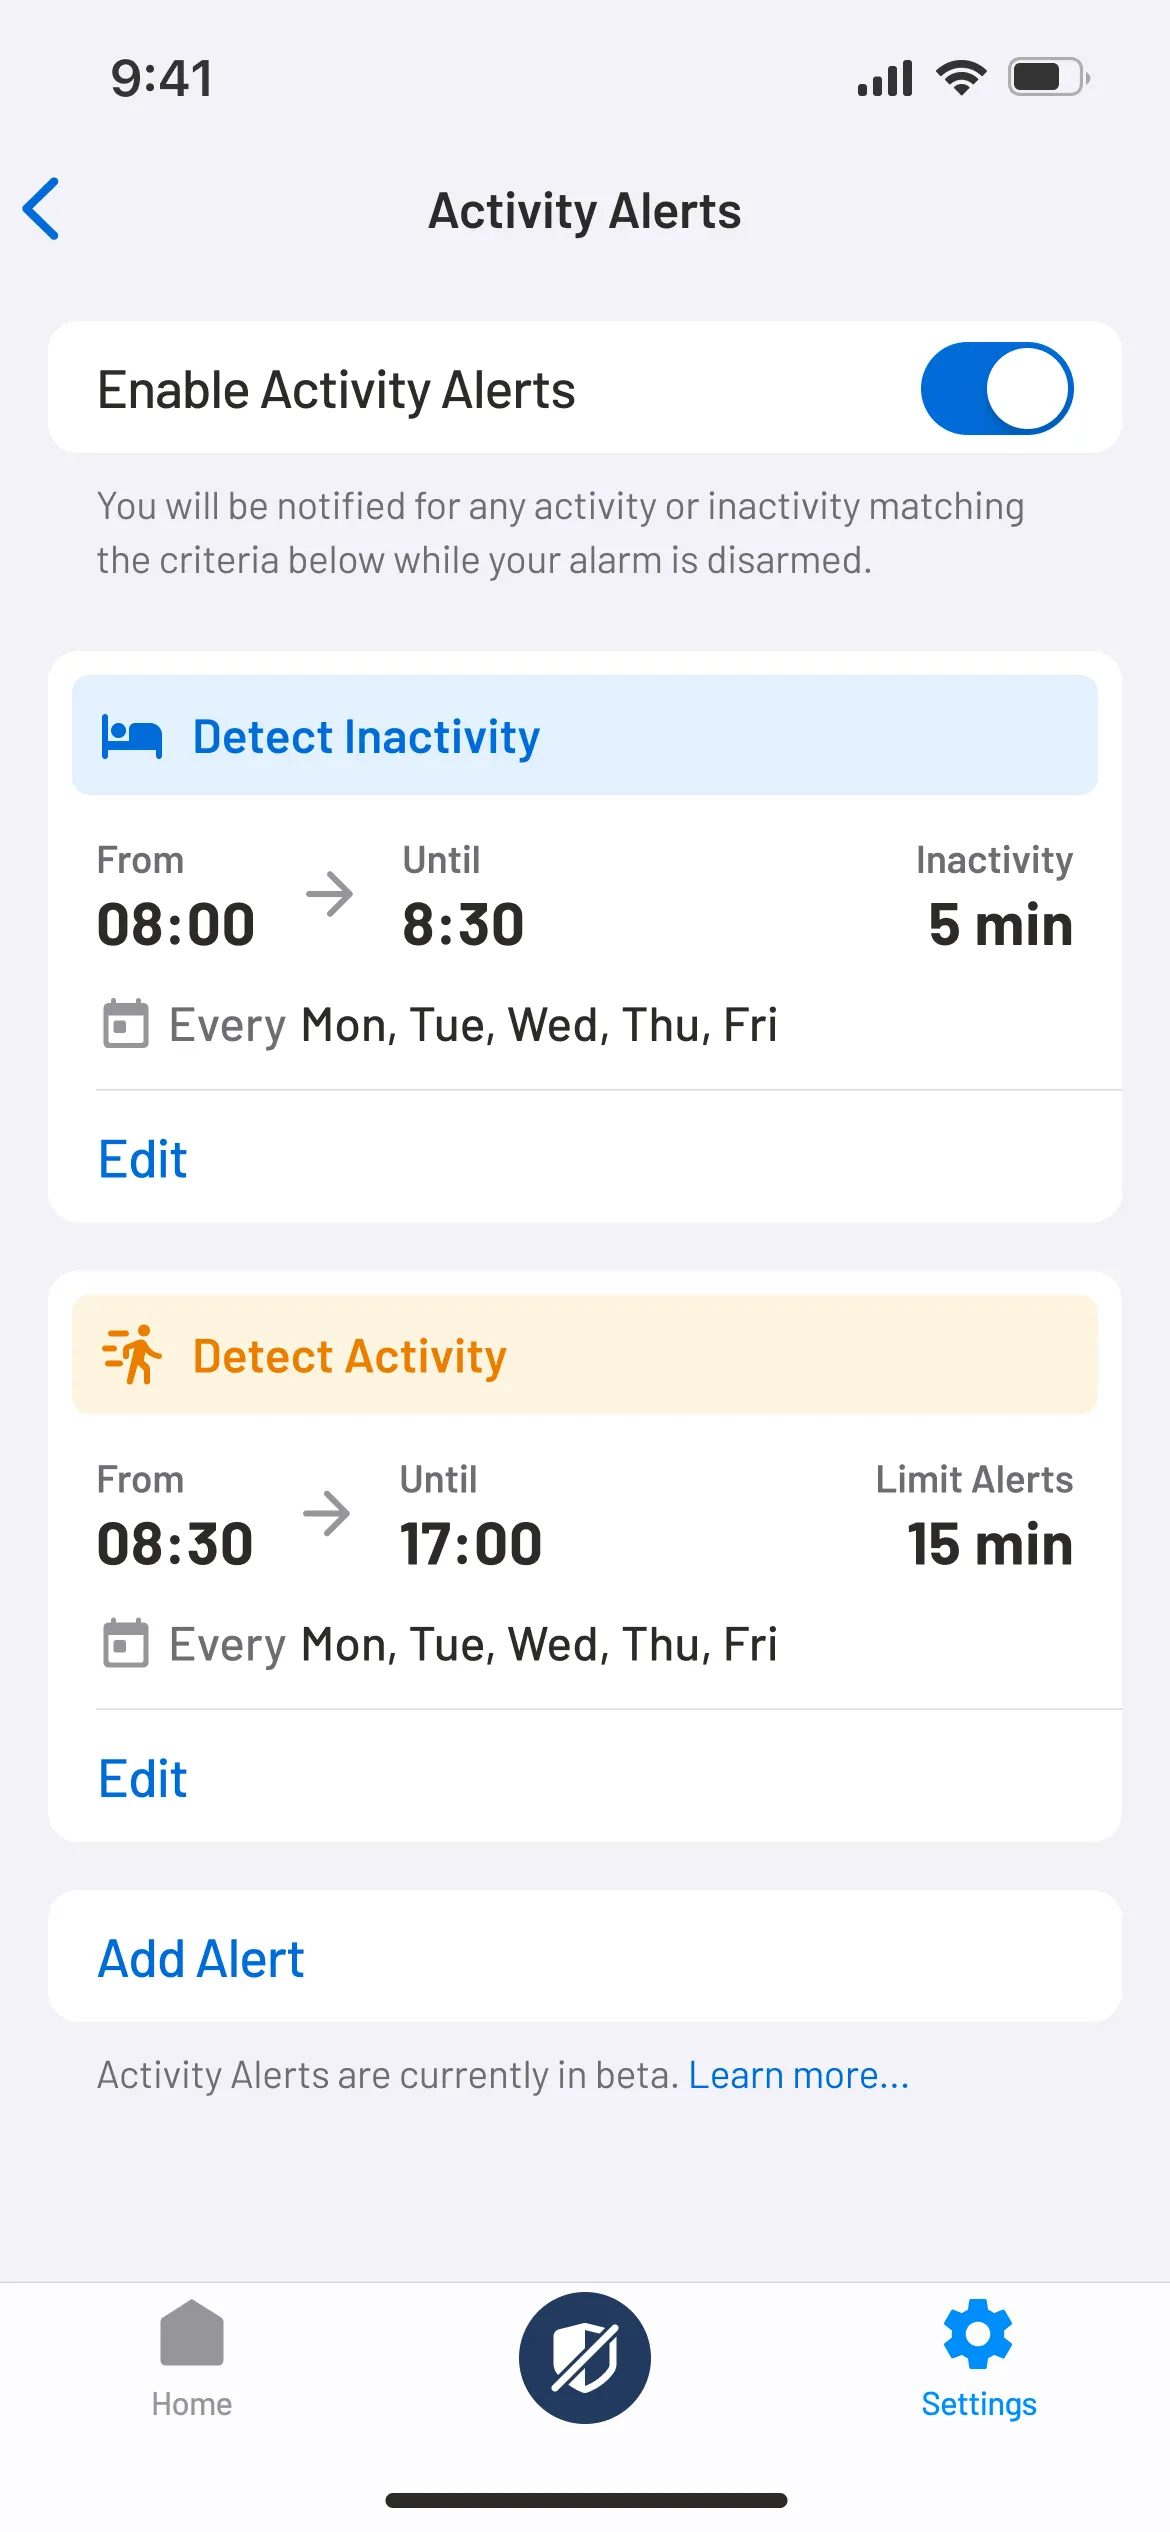 Mobile screen with 'Activity Alerts' for a security app, showing enabled alerts for detecting inactivity and activity with set schedules.